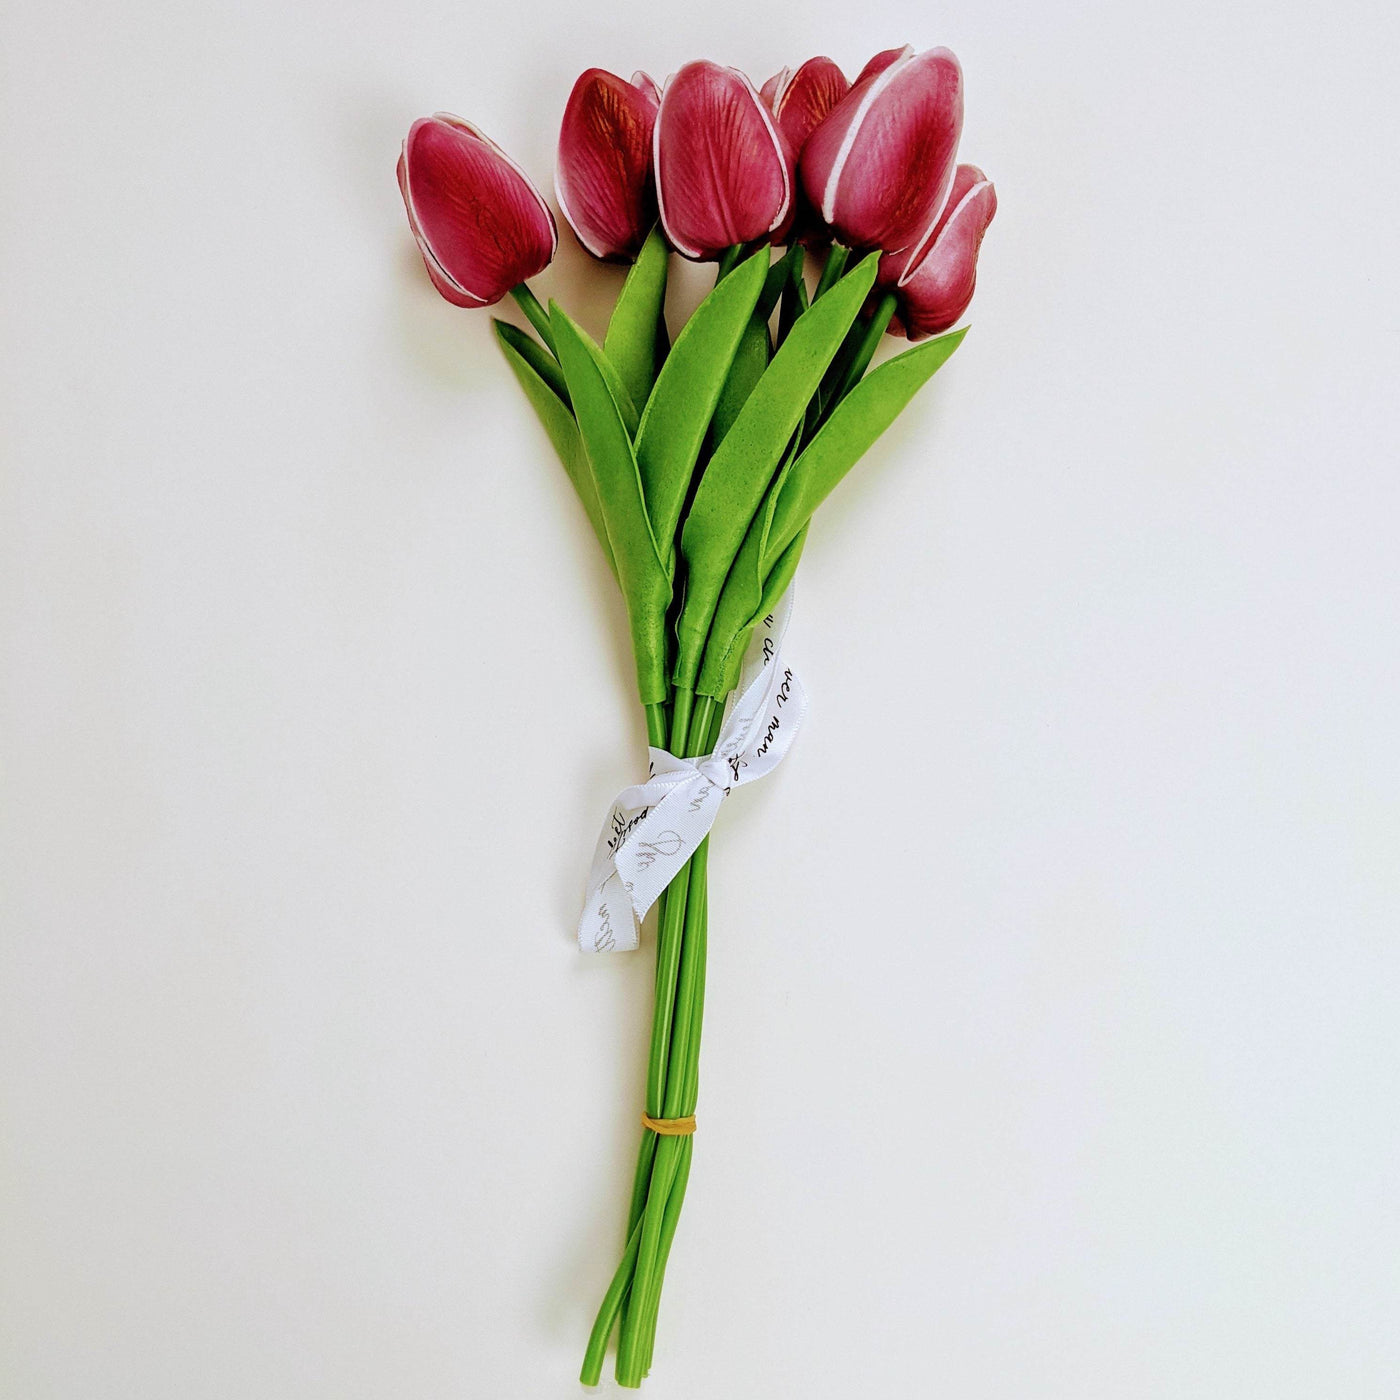 RealTouch Tulips included in Bridgerton Volume 1 (Sold Out)